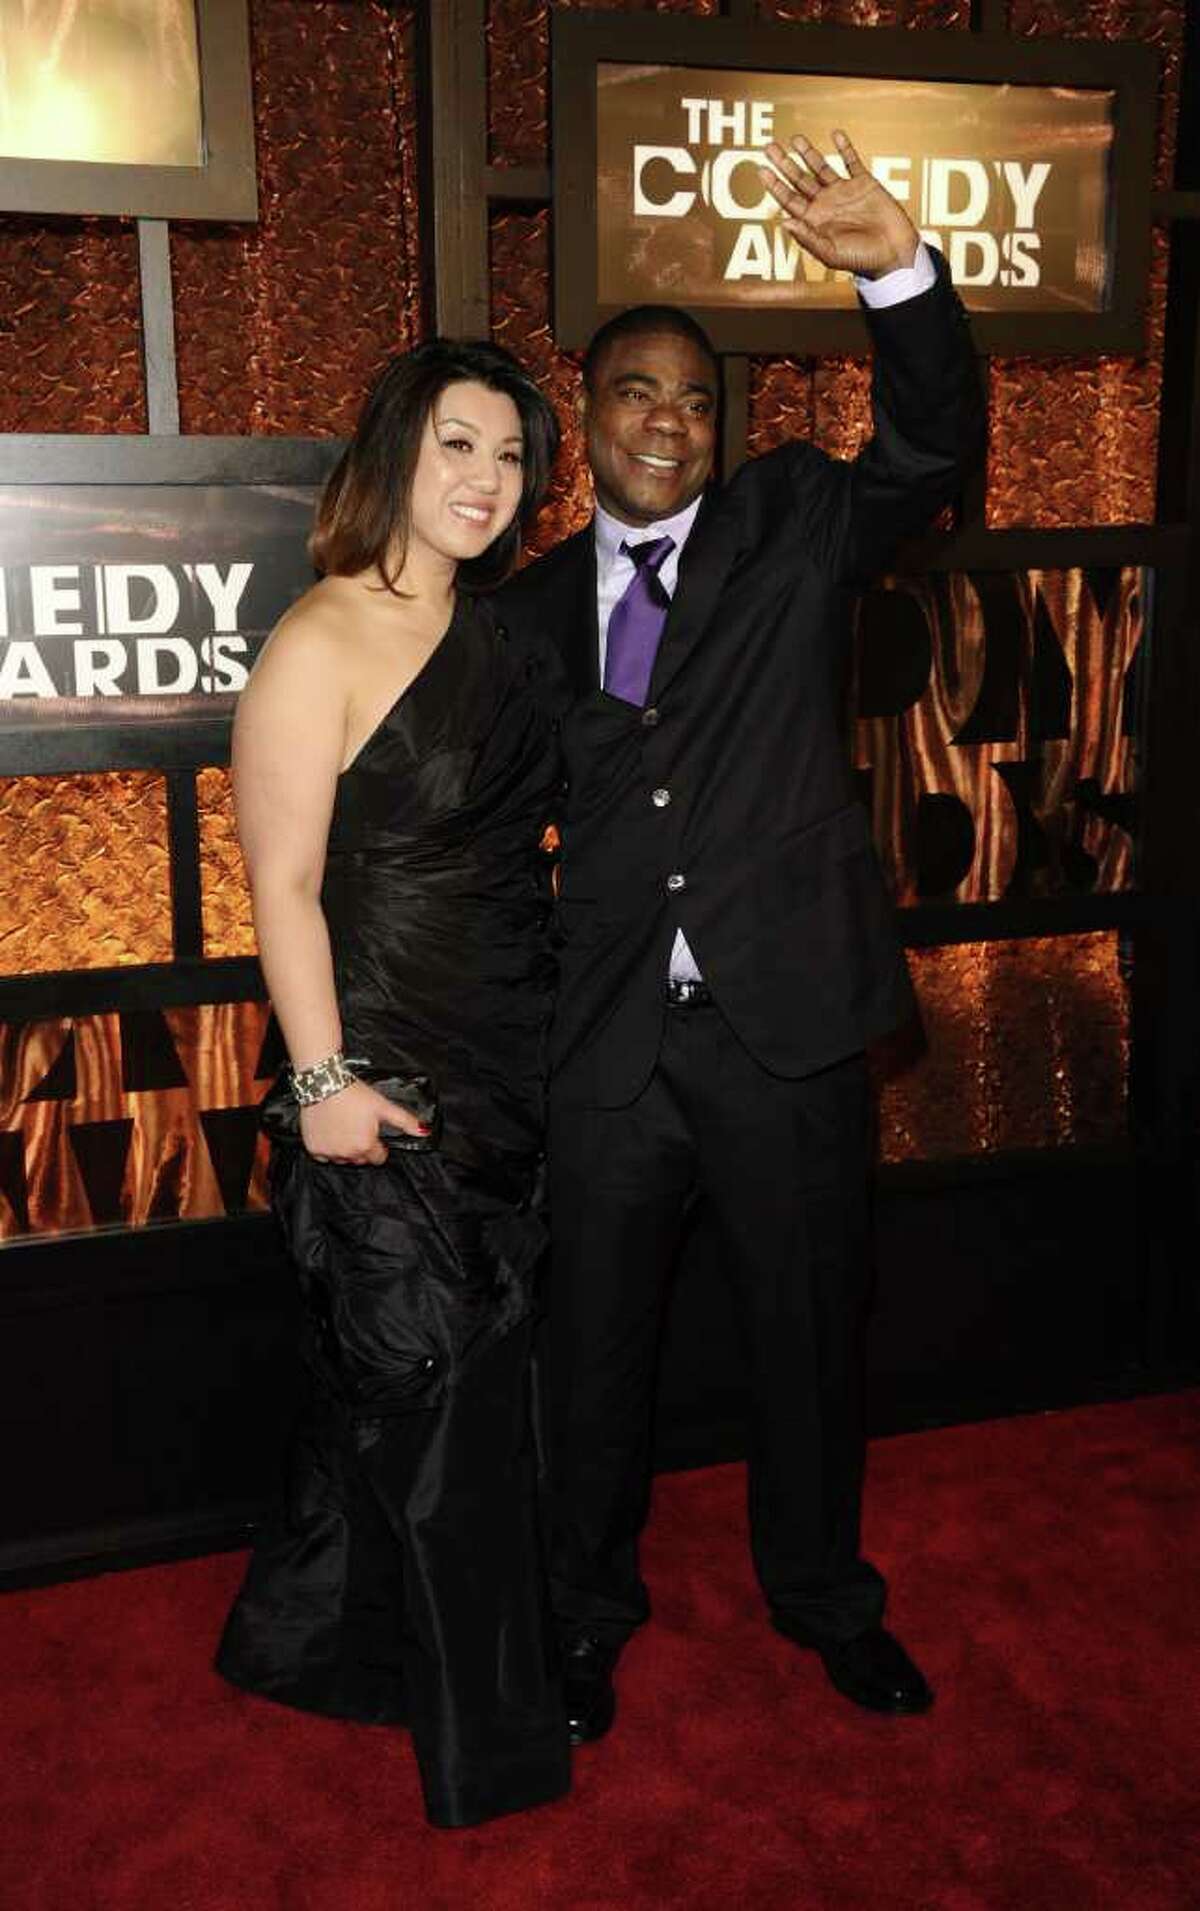 Actor Tracy Morgan, right, and his date Linda Trang attend the first annual "The Comedy Awards", honoring and celebrating the world of comedy, in New York, on Saturday, March 26, 2011.